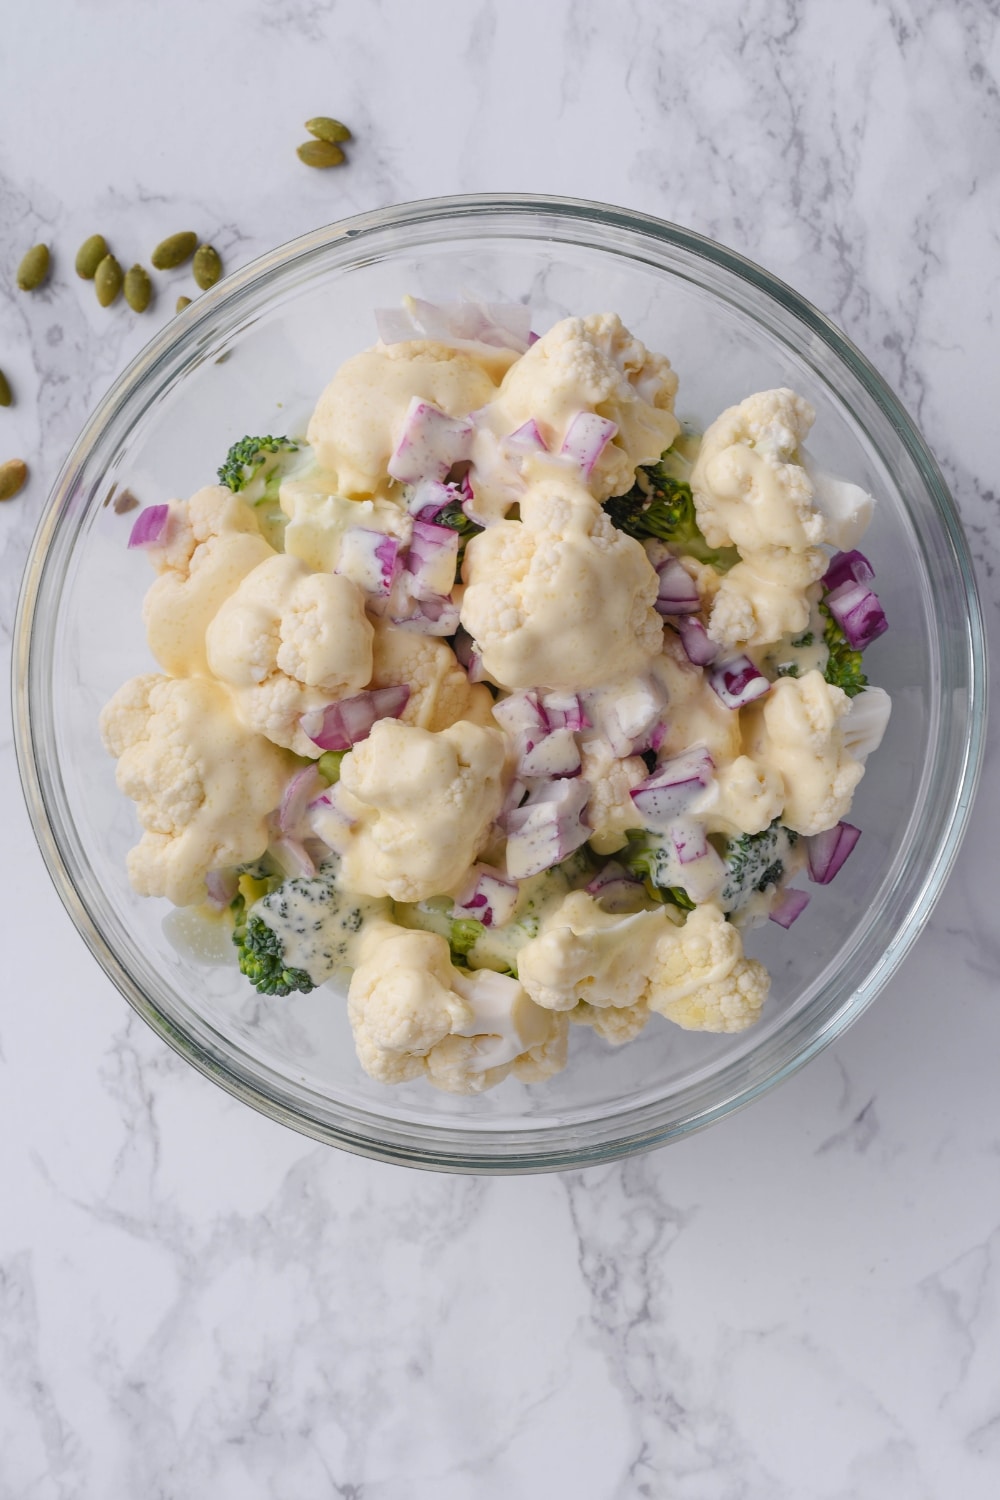 Cauliflower and broccoli florets with chopped red onions, coated in creamy salad dressing, in a glass bowl.